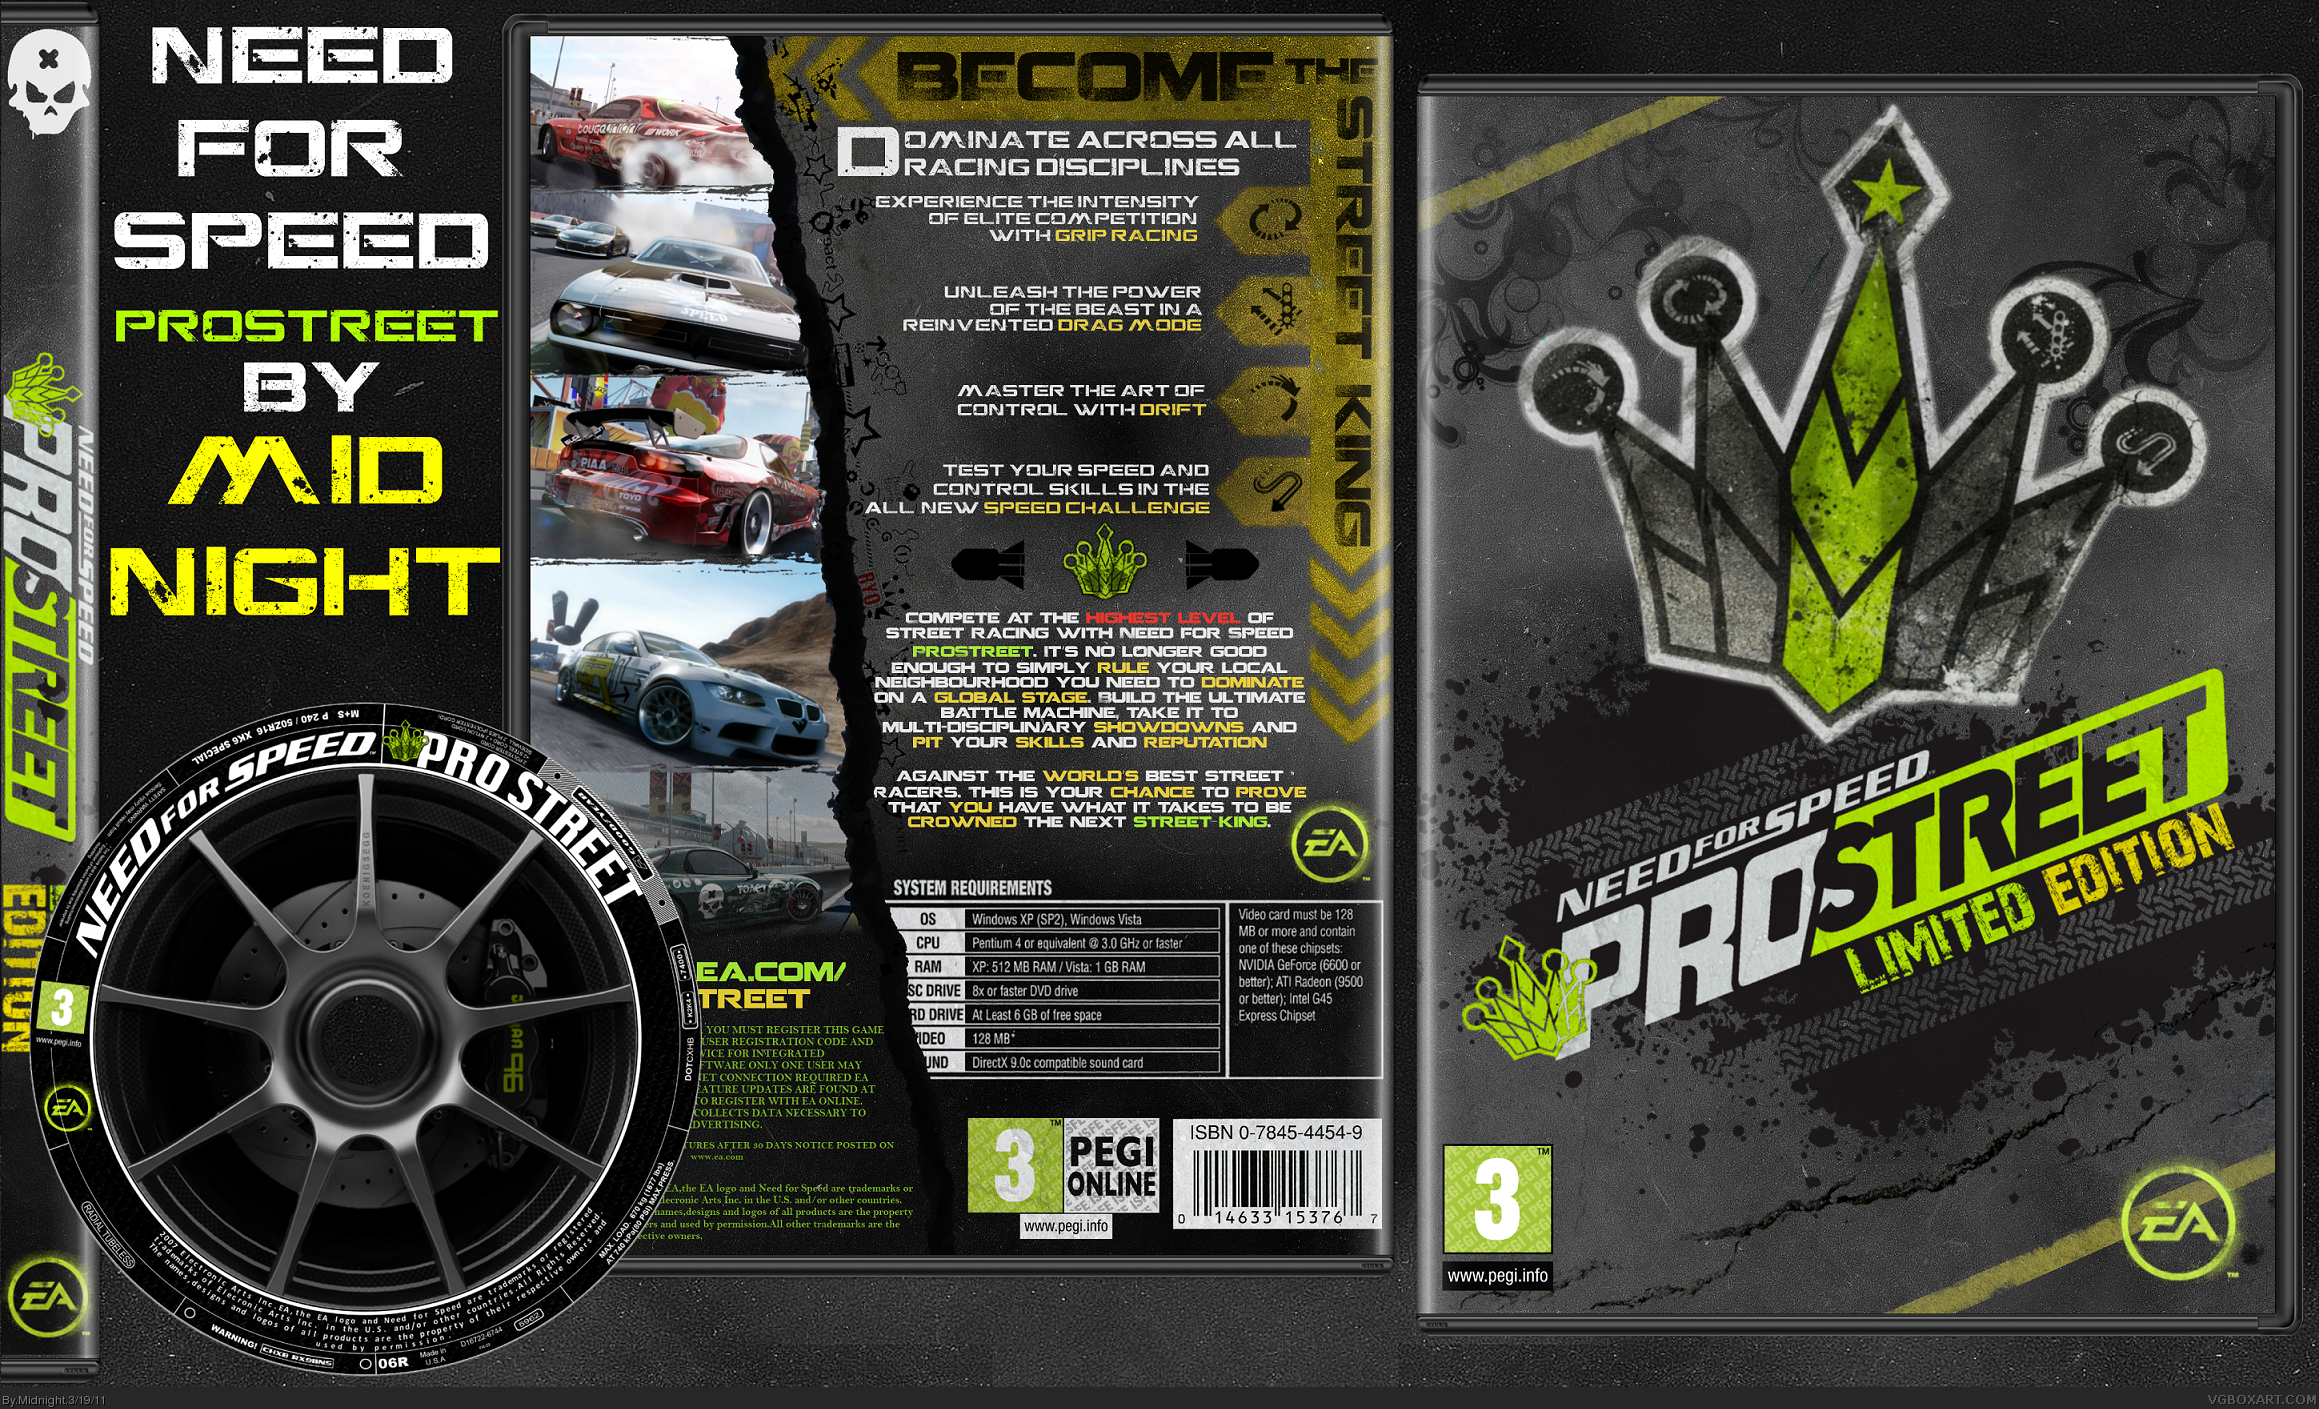 NFS: Prostreet Limited Edition box cover